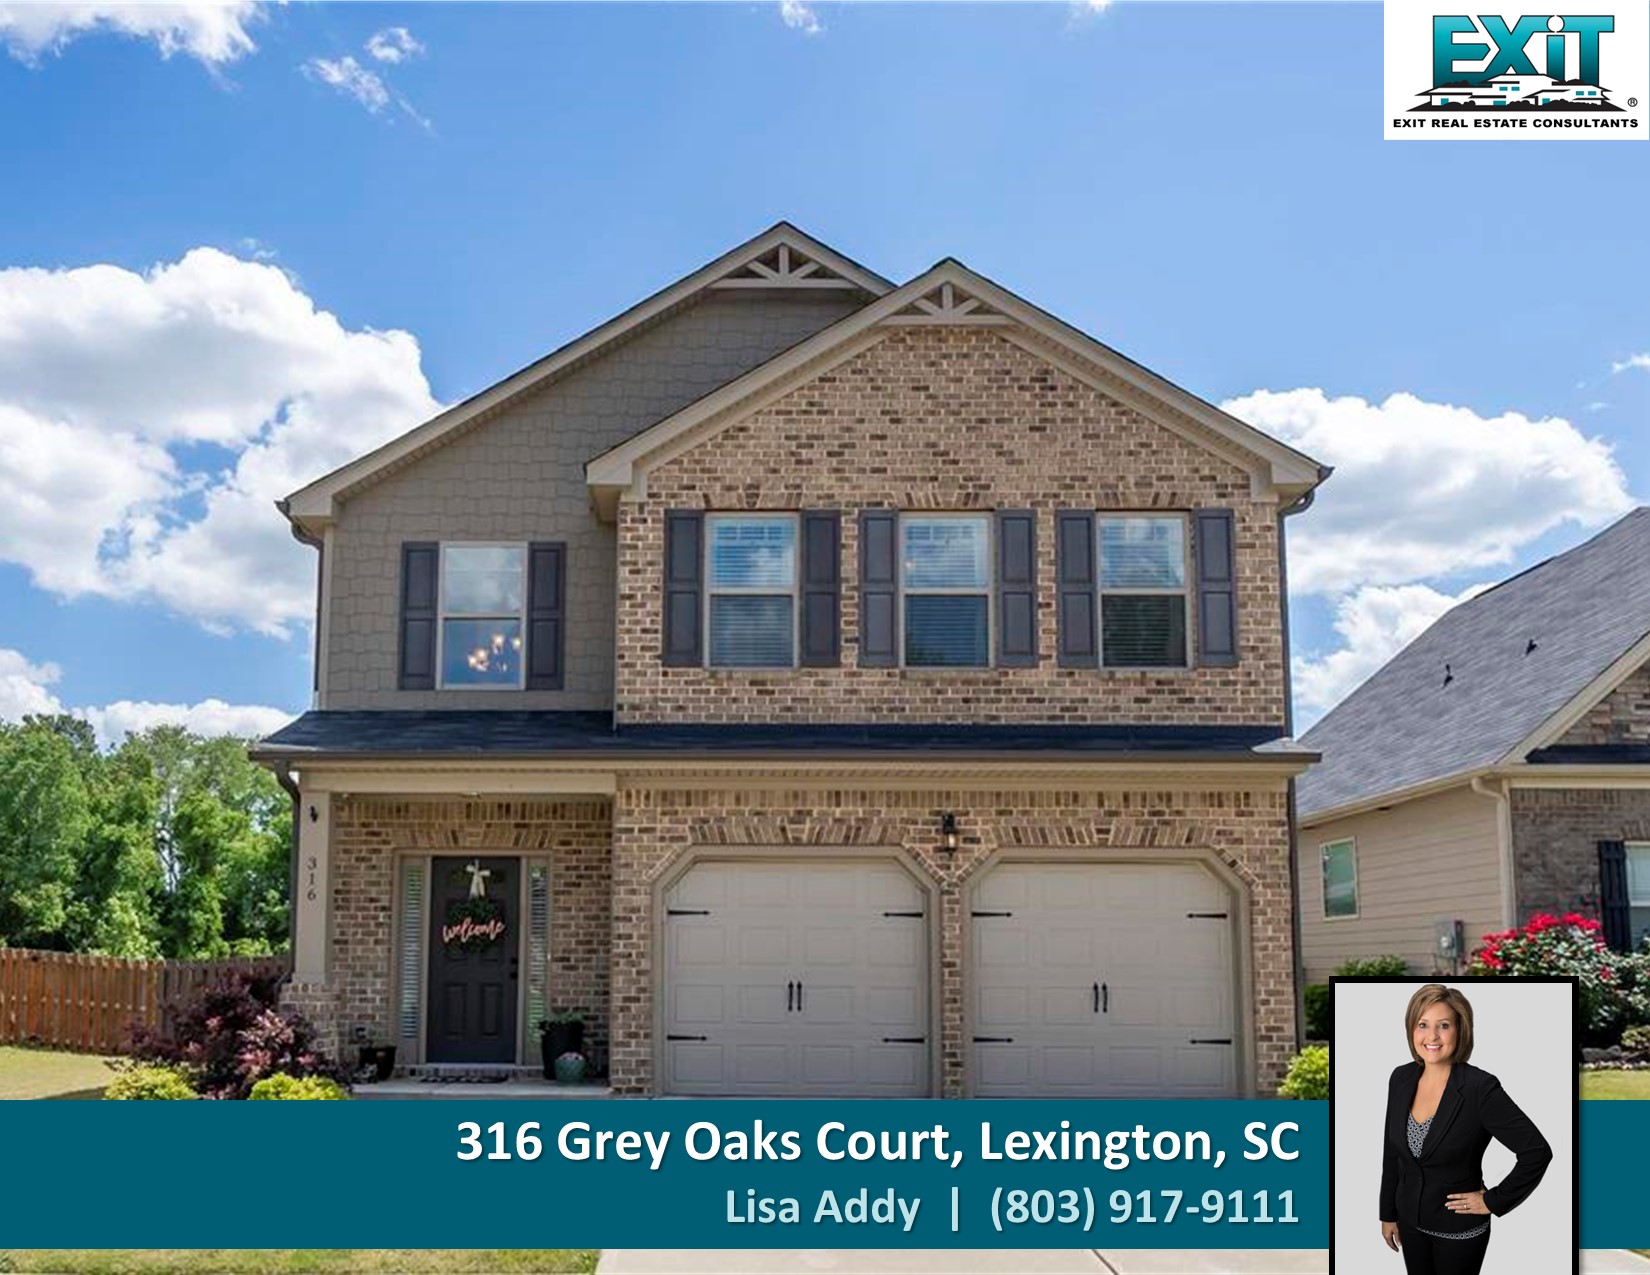 Just listed in Grey Oaks